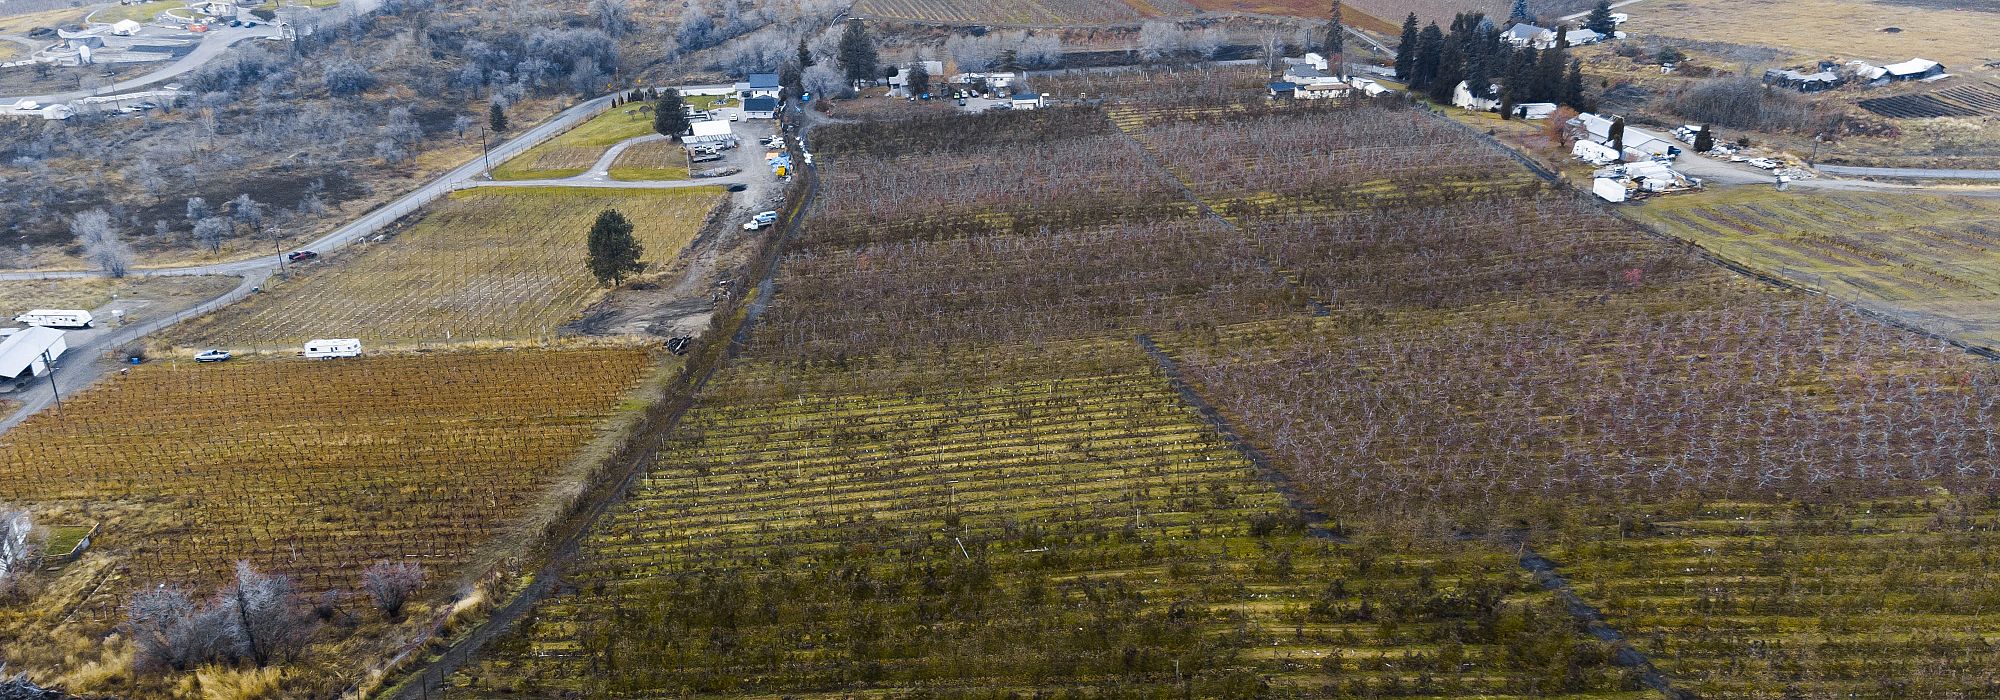 Sale of a 20+ acre apple orchard